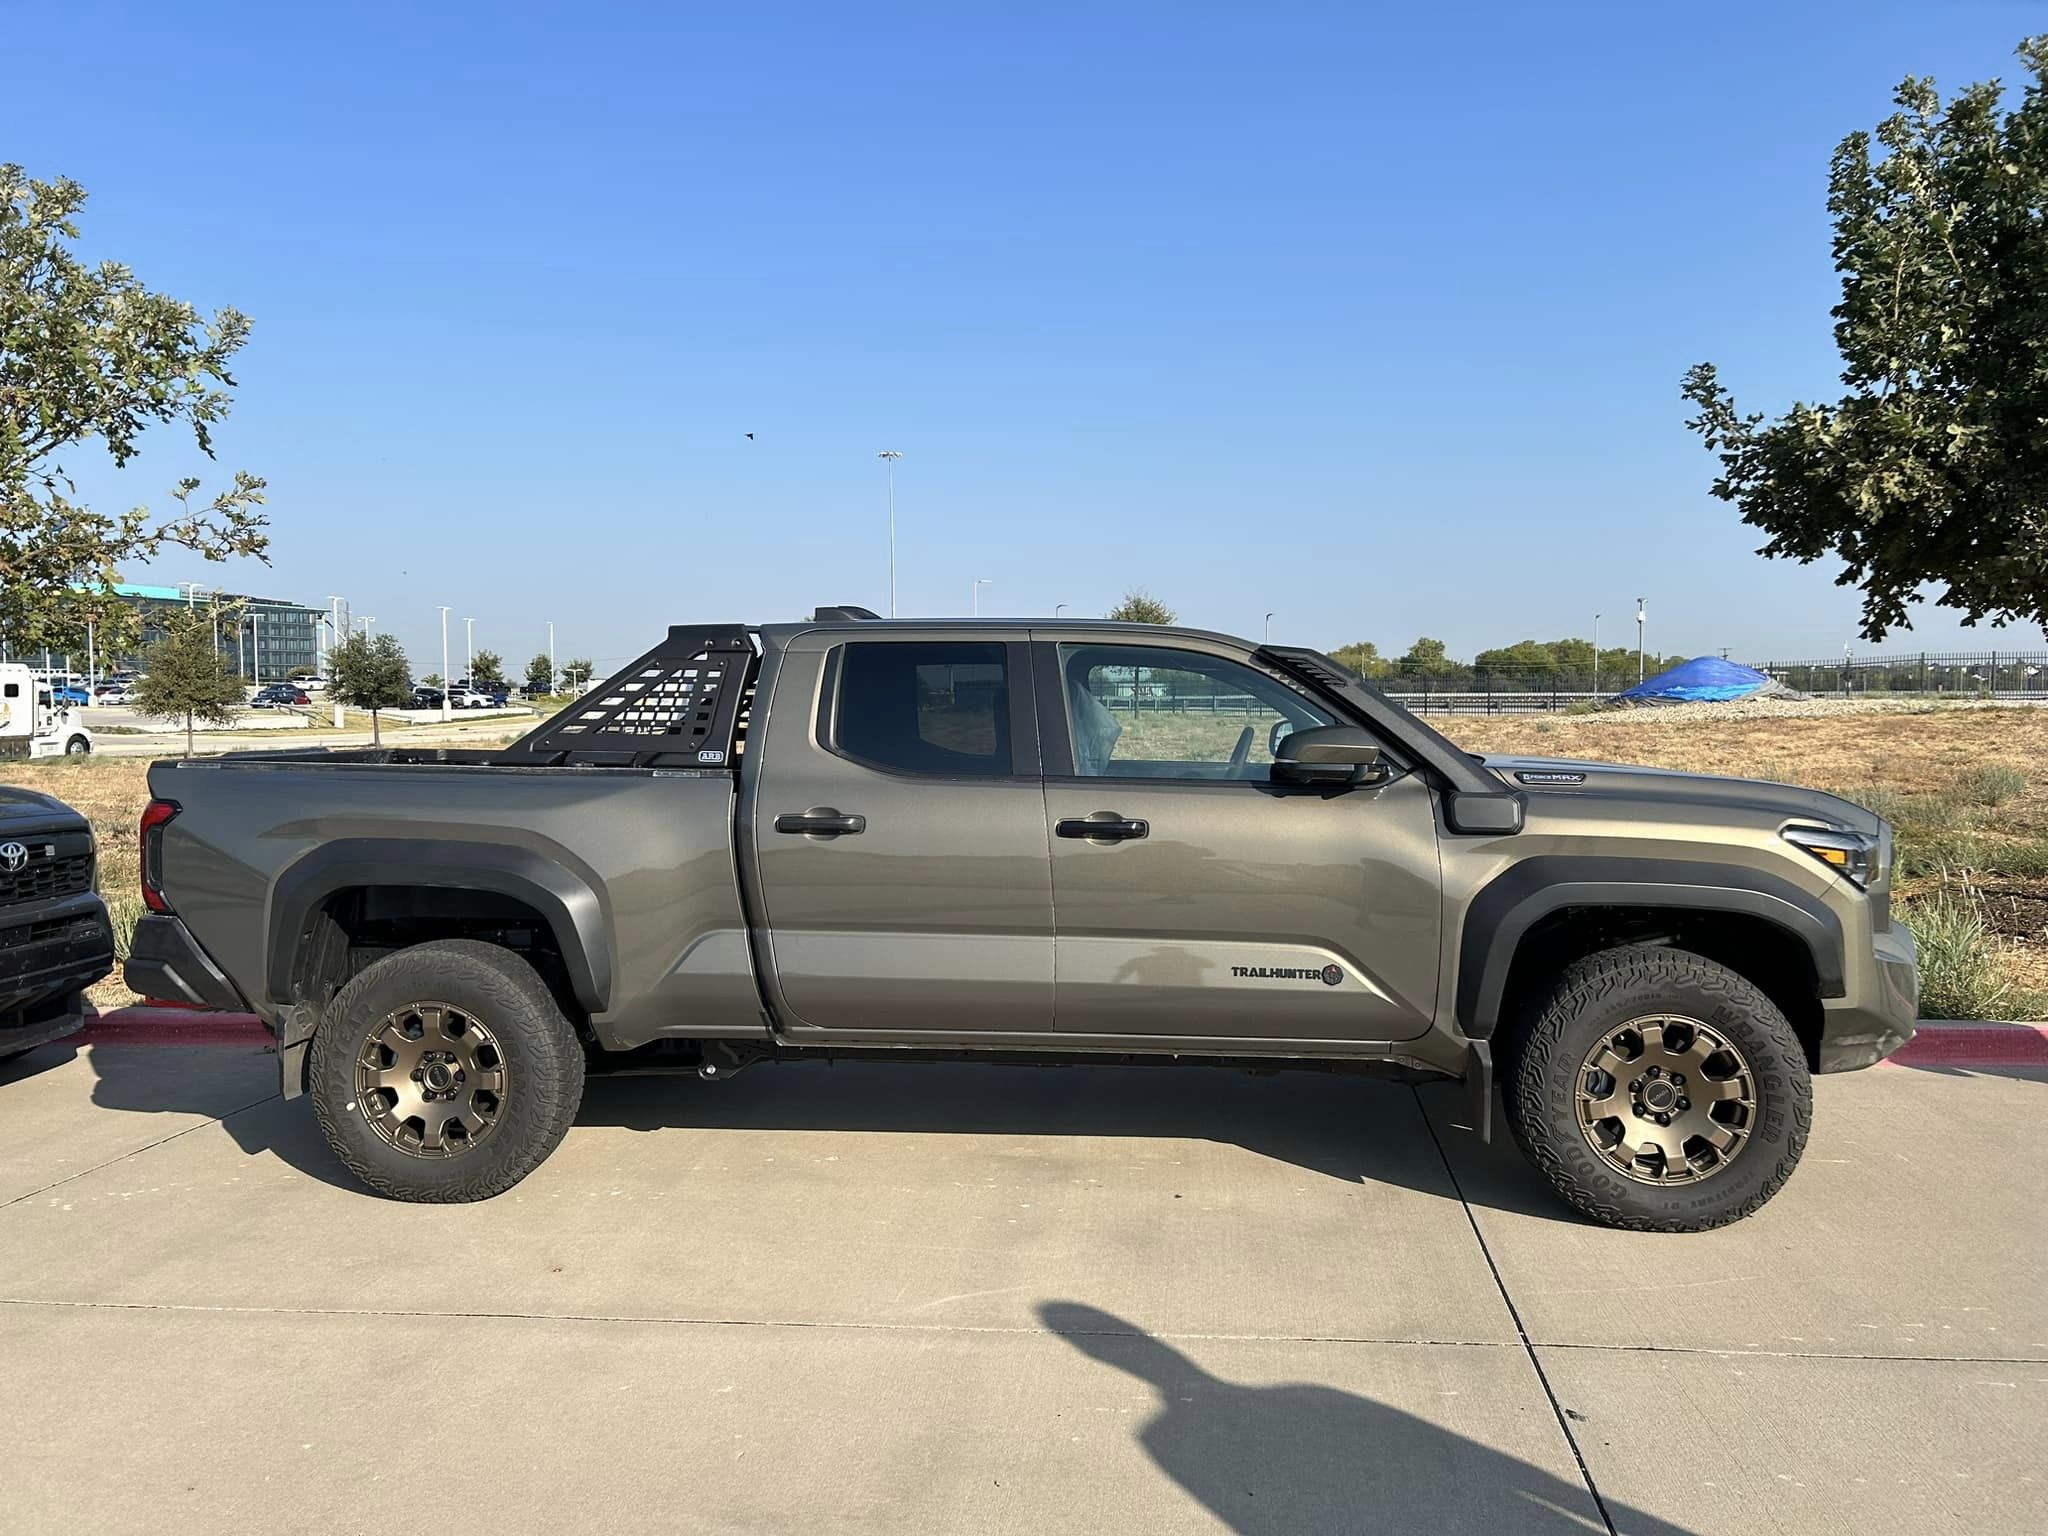 2024 Tacoma 2024 Tacoma TRAILHUNTER - Specs, Price (TBA) Features, Photos & Videos ronze-oxide-2024-trailhunter-tacoma-sport-rack-